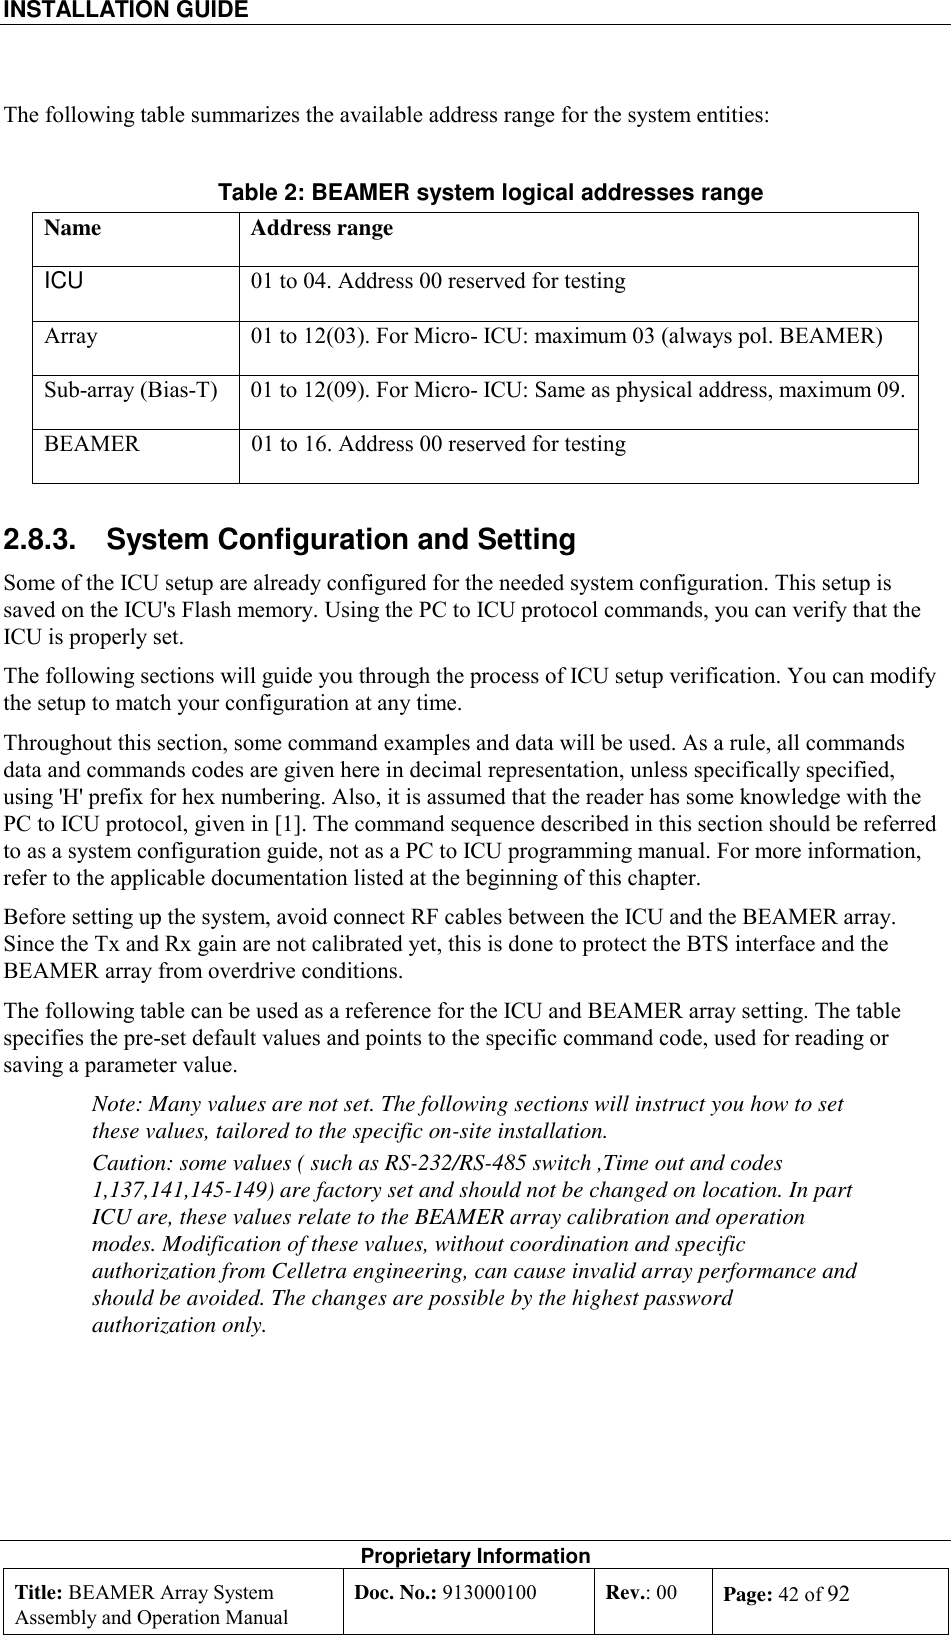 INSTALLATION GUIDE    Proprietary Information Title: BEAMER Array System Assembly and Operation Manual Doc. No.: 913000100  Rev.: 00  Page: 42 of 92  The following table summarizes the available address range for the system entities: Table 2: BEAMER system logical addresses range Name Address range ICU  01 to 04. Address 00 reserved for testing Array  01 to 12(03). For Micro- ICU: maximum 03 (always pol. BEAMER) Sub-array (Bias-T)  01 to 12(09). For Micro- ICU: Same as physical address, maximum 09. BEAMER  01 to 16. Address 00 reserved for testing 2.8.3.  System Configuration and Setting  Some of the ICU setup are already configured for the needed system configuration. This setup is saved on the ICU&apos;s Flash memory. Using the PC to ICU protocol commands, you can verify that the ICU is properly set.  The following sections will guide you through the process of ICU setup verification. You can modify the setup to match your configuration at any time.  Throughout this section, some command examples and data will be used. As a rule, all commands data and commands codes are given here in decimal representation, unless specifically specified, using &apos;H&apos; prefix for hex numbering. Also, it is assumed that the reader has some knowledge with the PC to ICU protocol, given in [1]. The command sequence described in this section should be referred to as a system configuration guide, not as a PC to ICU programming manual. For more information, refer to the applicable documentation listed at the beginning of this chapter. Before setting up the system, avoid connect RF cables between the ICU and the BEAMER array. Since the Tx and Rx gain are not calibrated yet, this is done to protect the BTS interface and the BEAMER array from overdrive conditions. The following table can be used as a reference for the ICU and BEAMER array setting. The table specifies the pre-set default values and points to the specific command code, used for reading or saving a parameter value. Note: Many values are not set. The following sections will instruct you how to set these values, tailored to the specific on-site installation. Caution: some values ( such as RS-232/RS-485 switch ,Time out and codes 1,137,141,145-149) are factory set and should not be changed on location. In part ICU are, these values relate to the BEAMER array calibration and operation modes. Modification of these values, without coordination and specific authorization from Celletra engineering, can cause invalid array performance and should be avoided. The changes are possible by the highest password authorization only.  